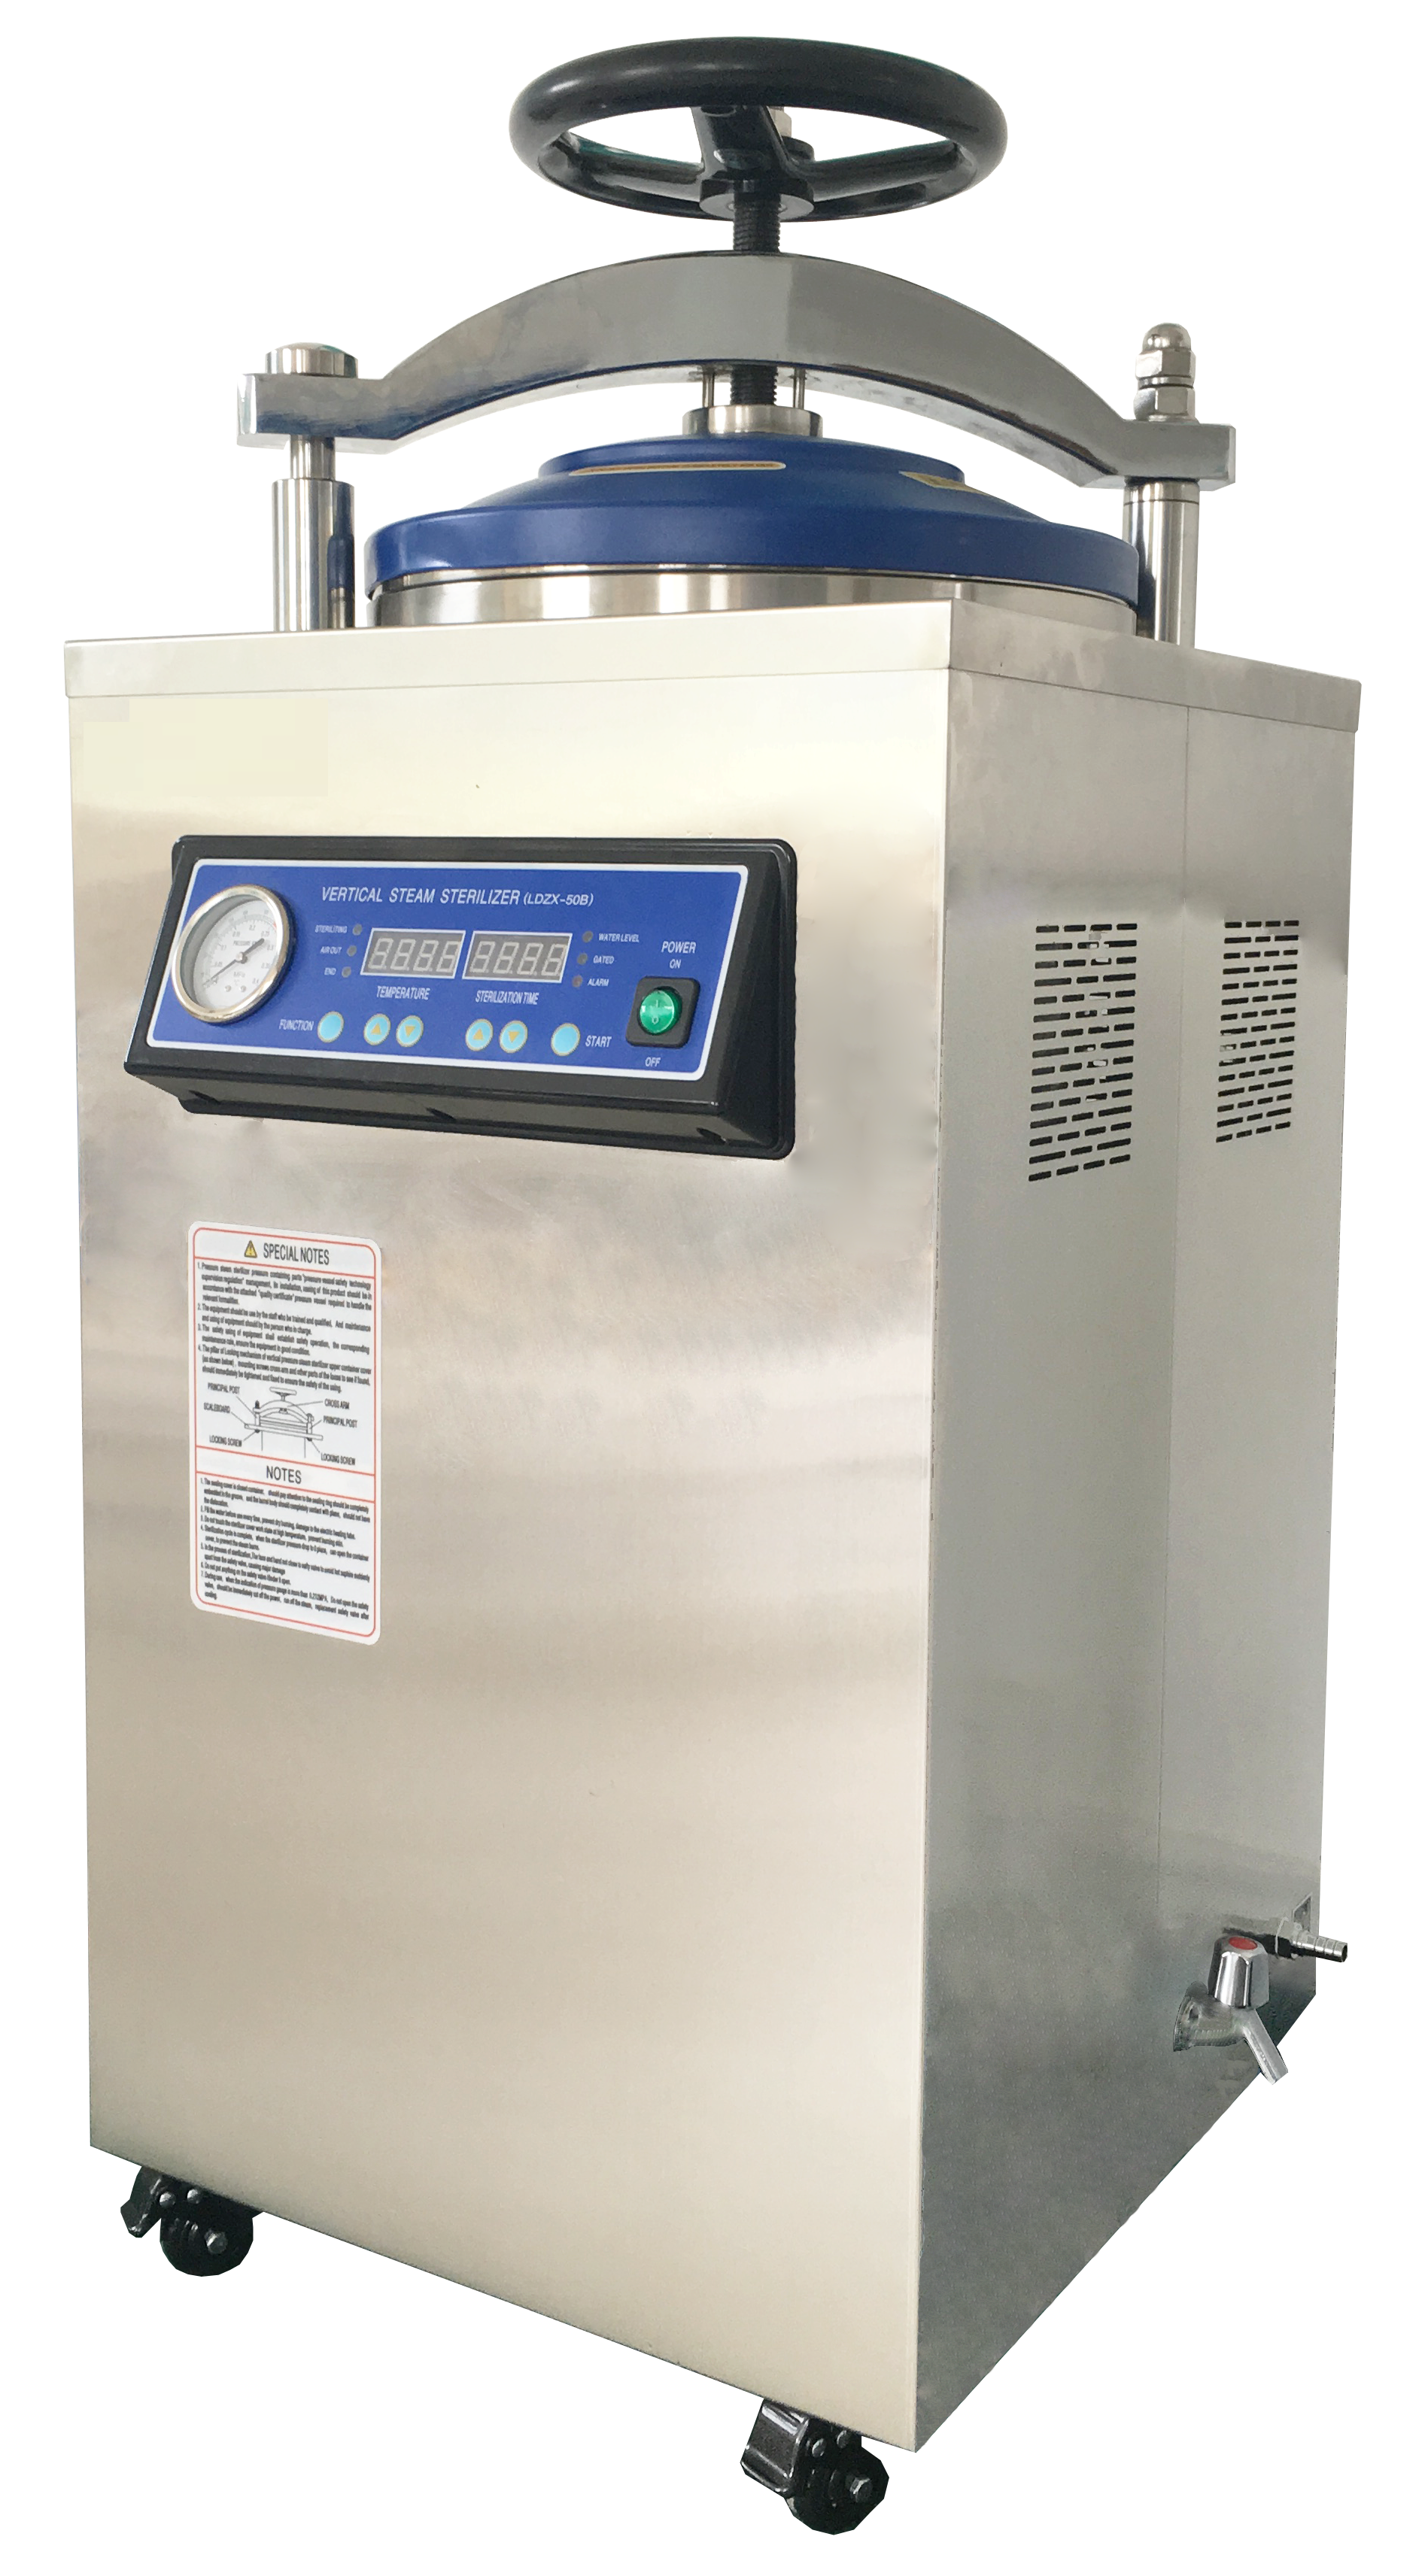  Automatic Stainless Steel Sterilizer